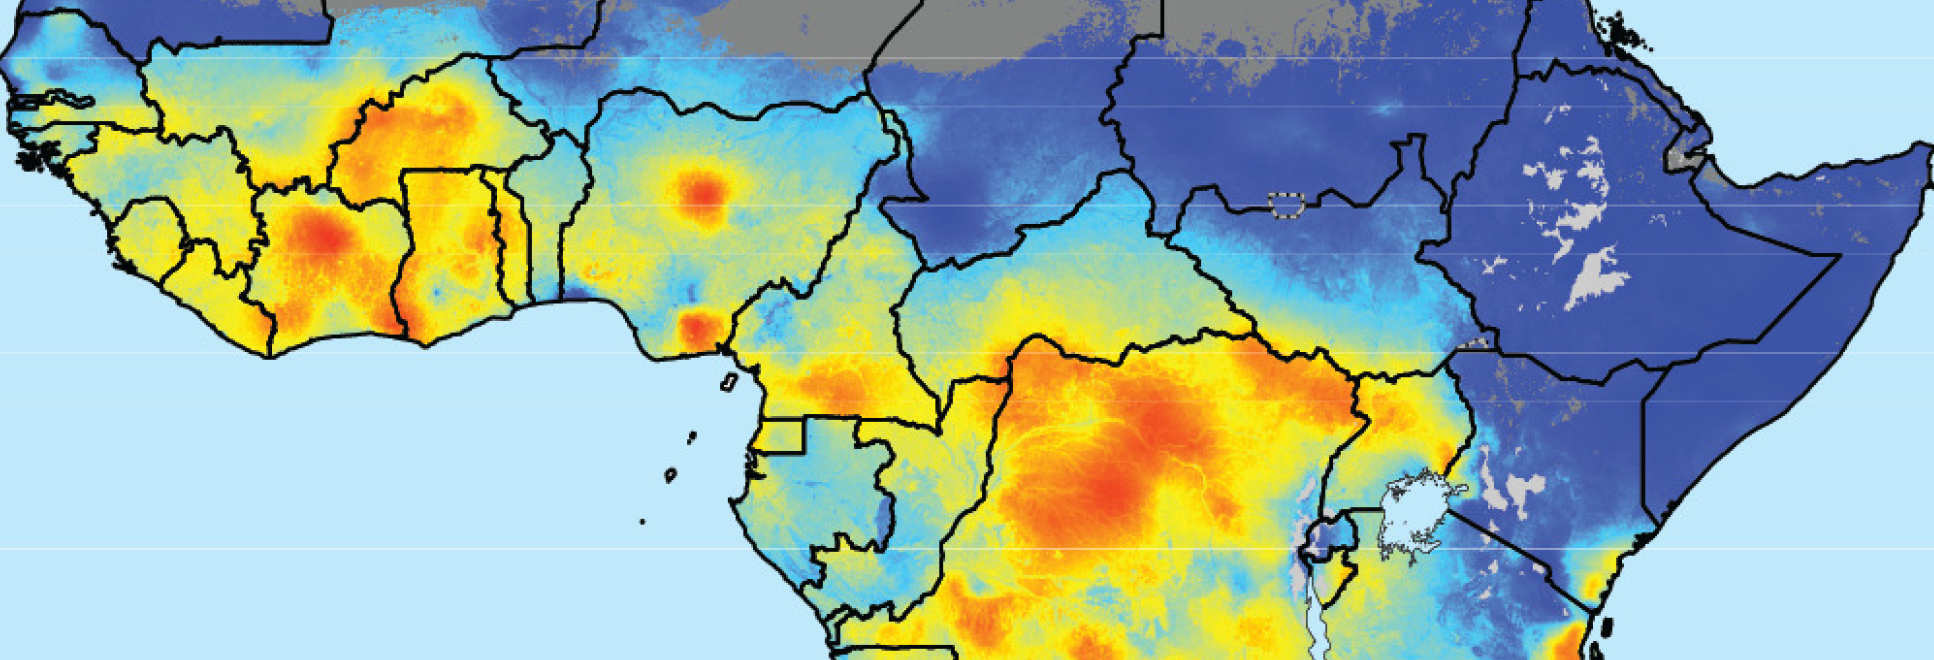 A spatial map of malaria transmission across Africa